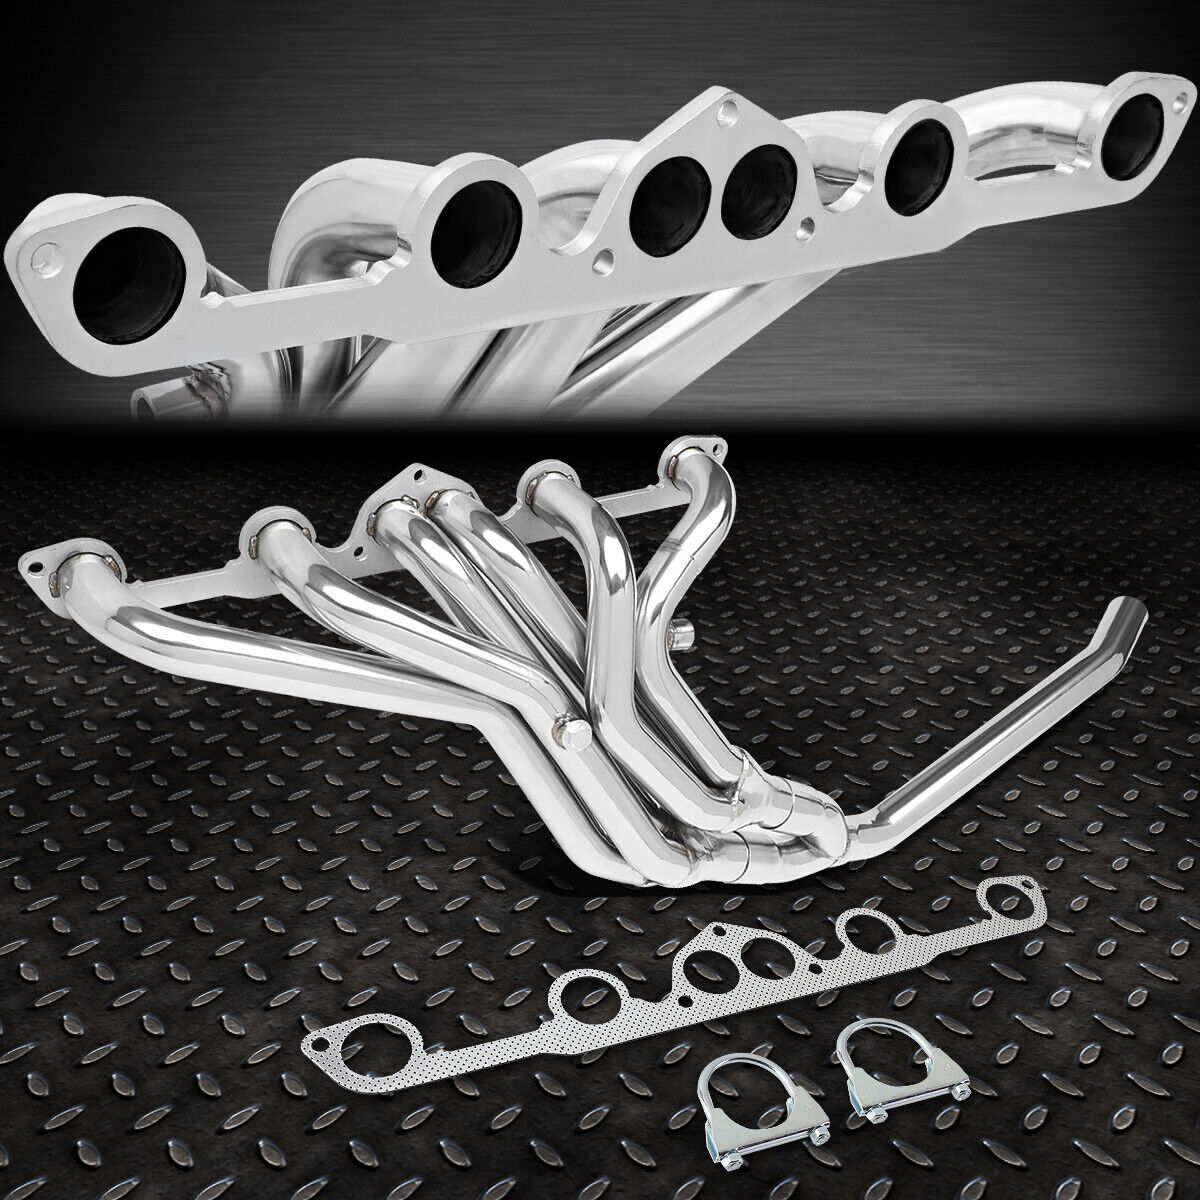  Stainless Round Exhaust Header Manifold For 77-83 Nissan/Datsun 280Z 280ZX L28E